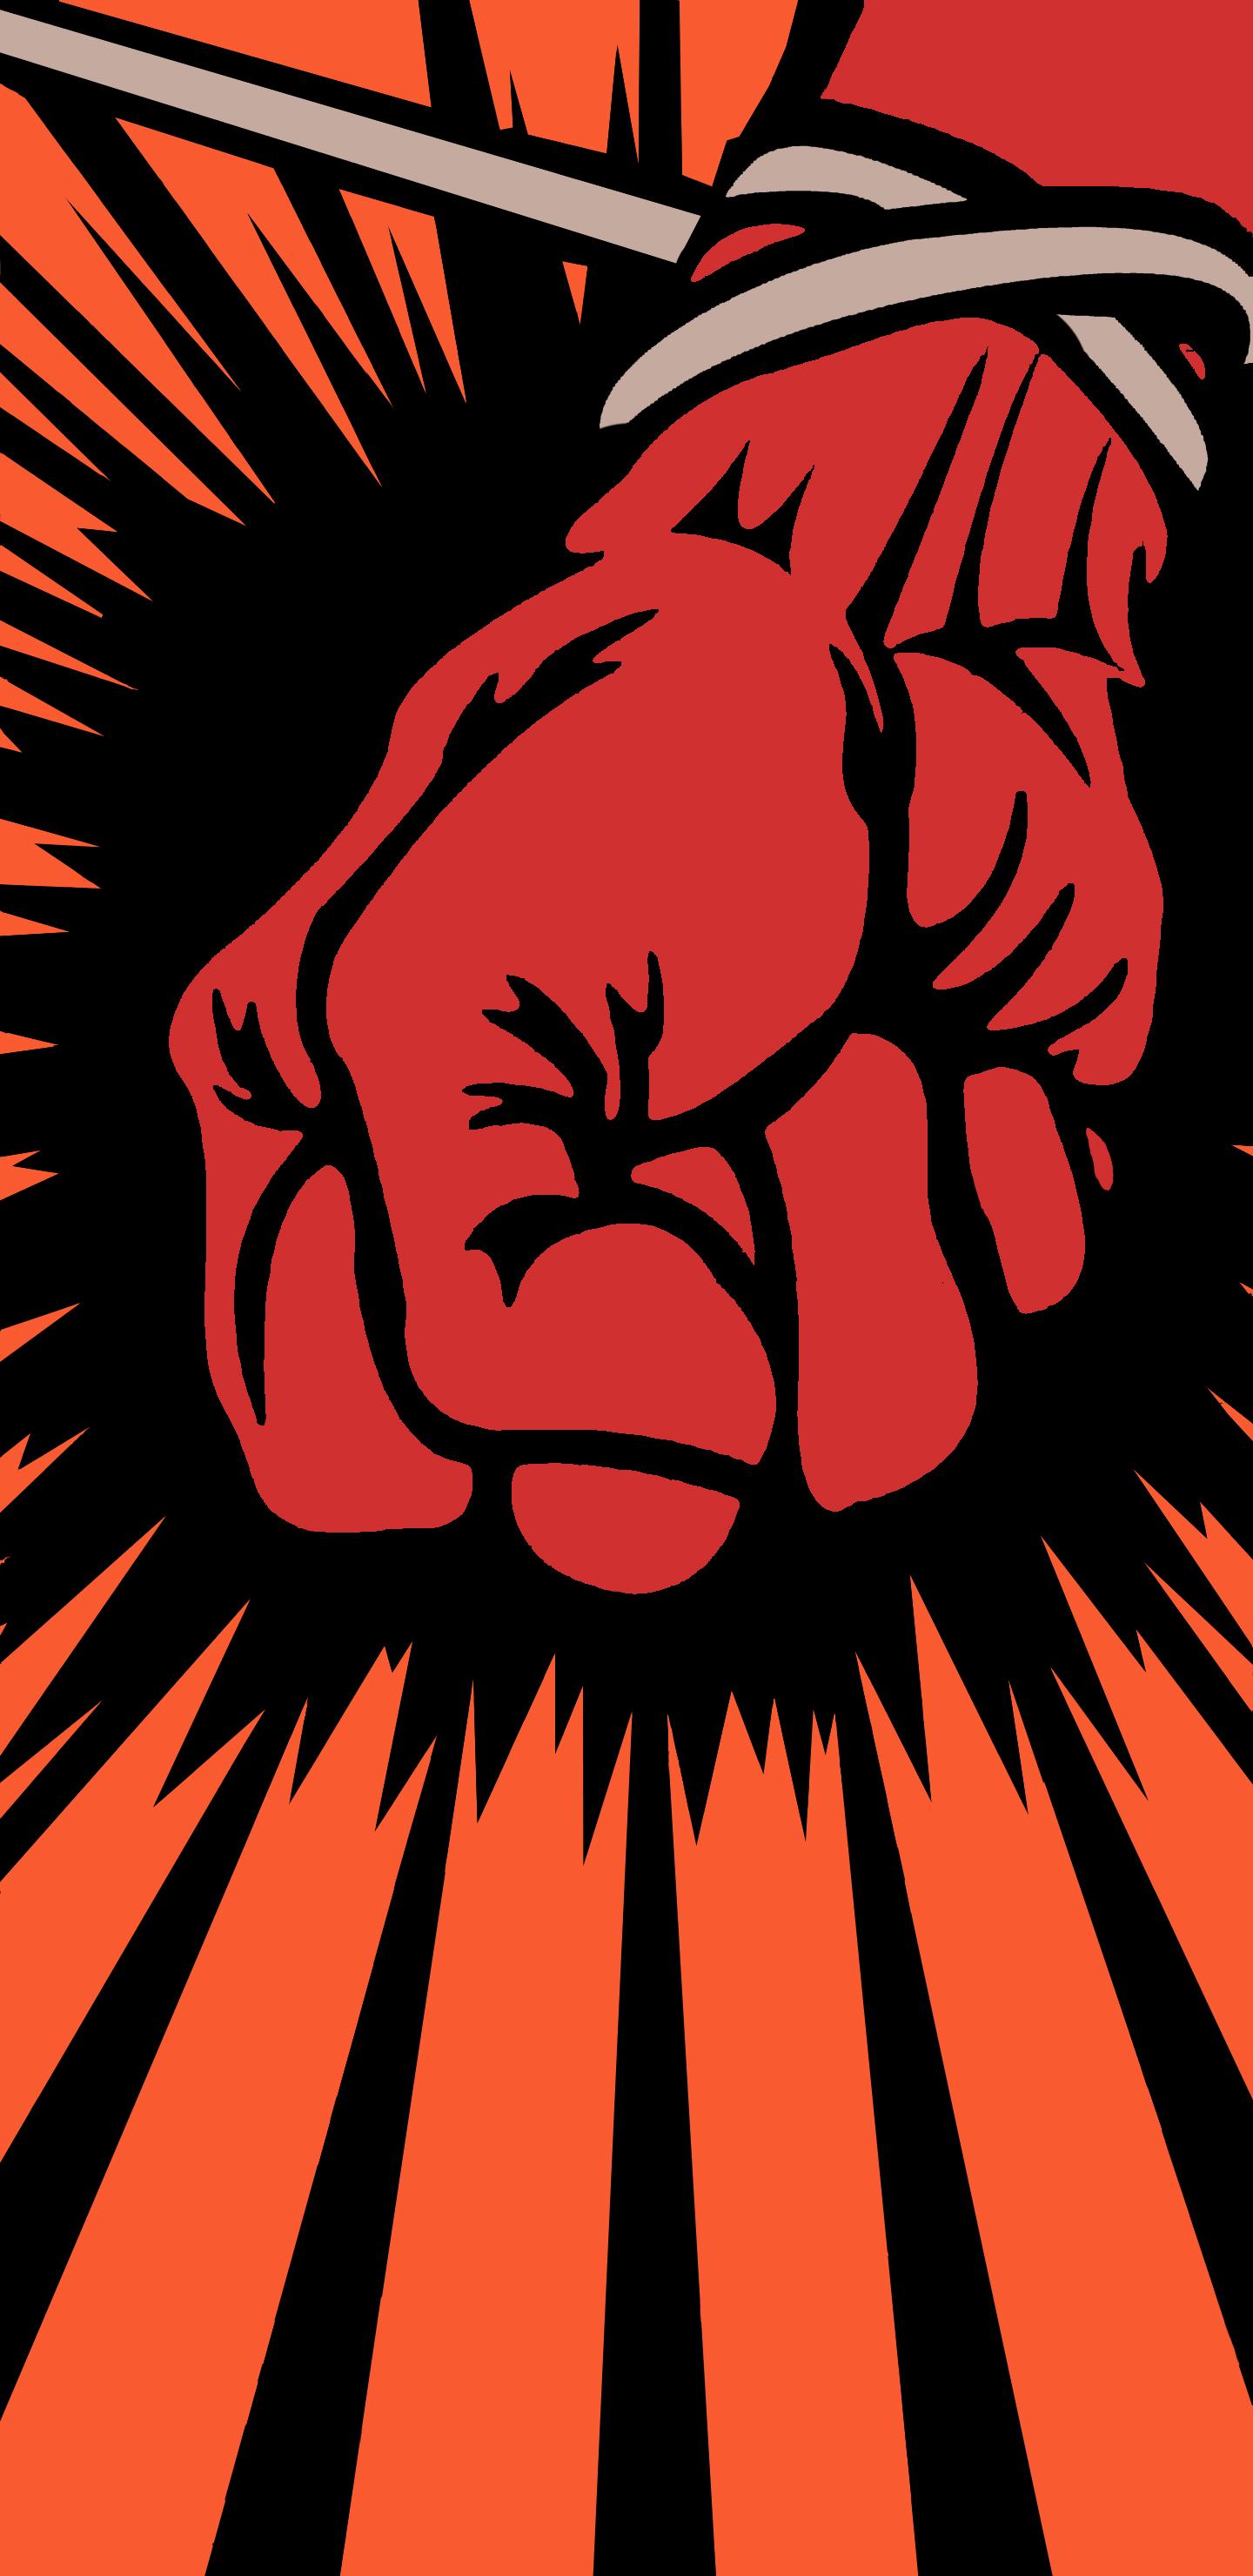 as suggested, heres my best attempt at a St.Anger wallpaper [2960x1440]